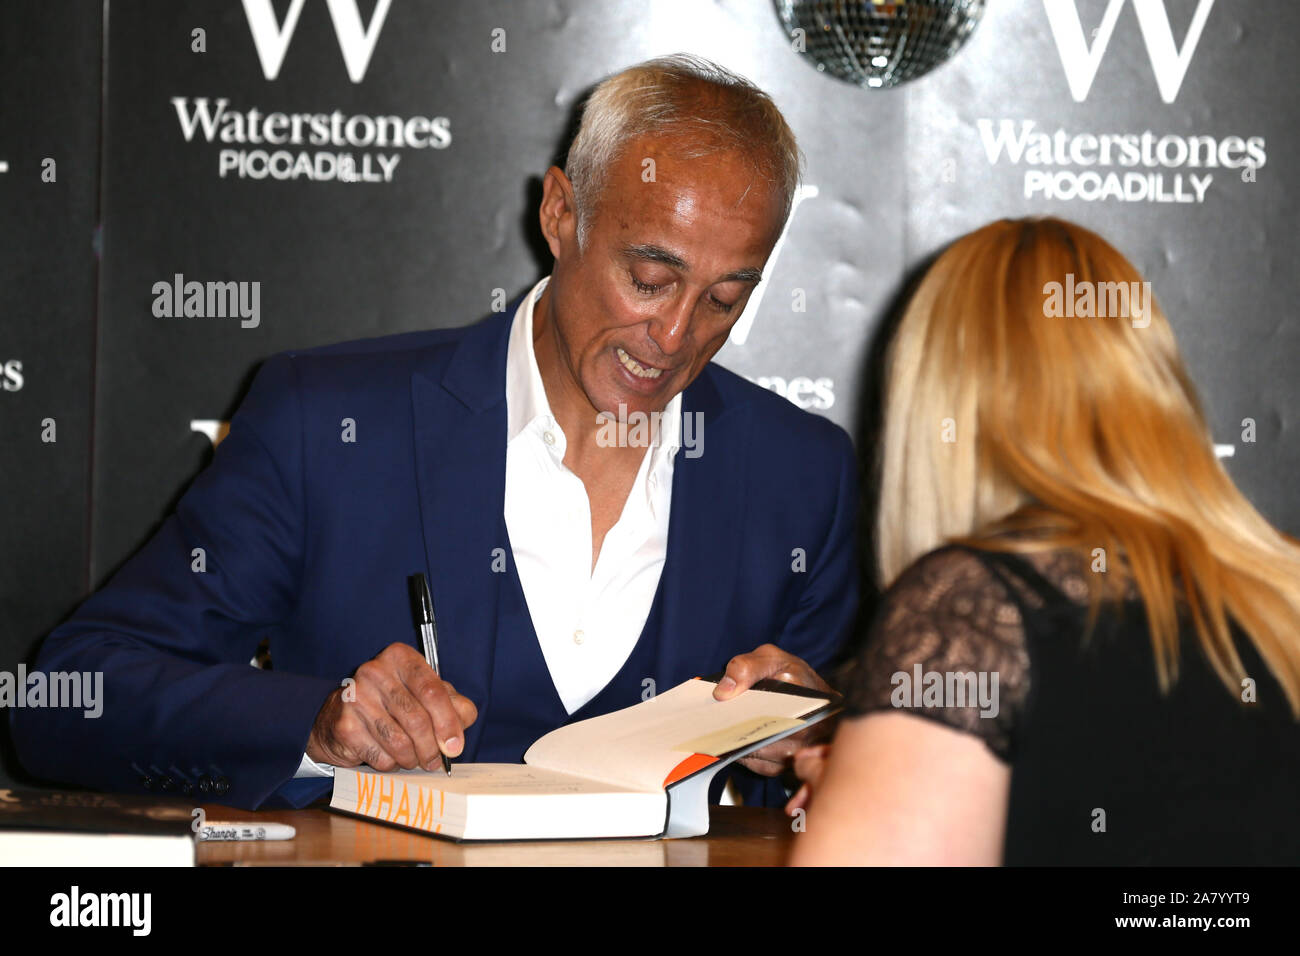 The Andrew Ridgeley Book Signing at Waterstones Piccadilly Featuring: Andrew Ridgeley Where: London, United Kingdom When: 05 Oct 2019 Credit: Mario Mitsis/WENN.com Stock Photo